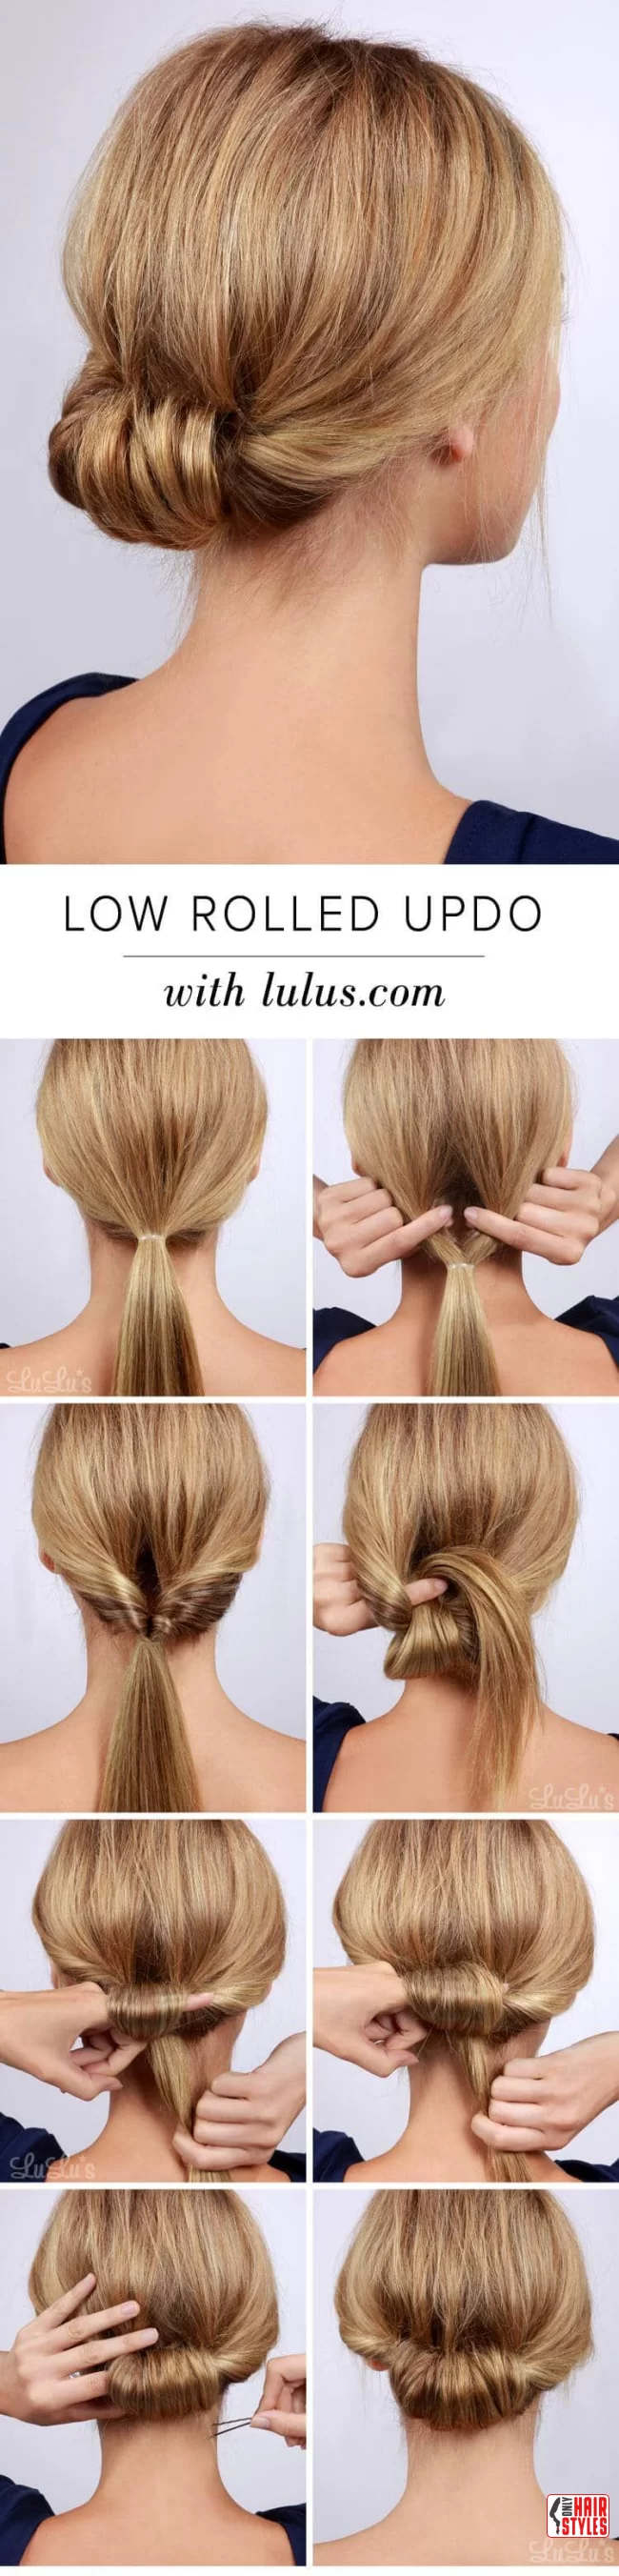 Low Rolled Updo for Long Straight Hair | 10 Easy Step By Step Hair Tutorials For Chic Hairstyles